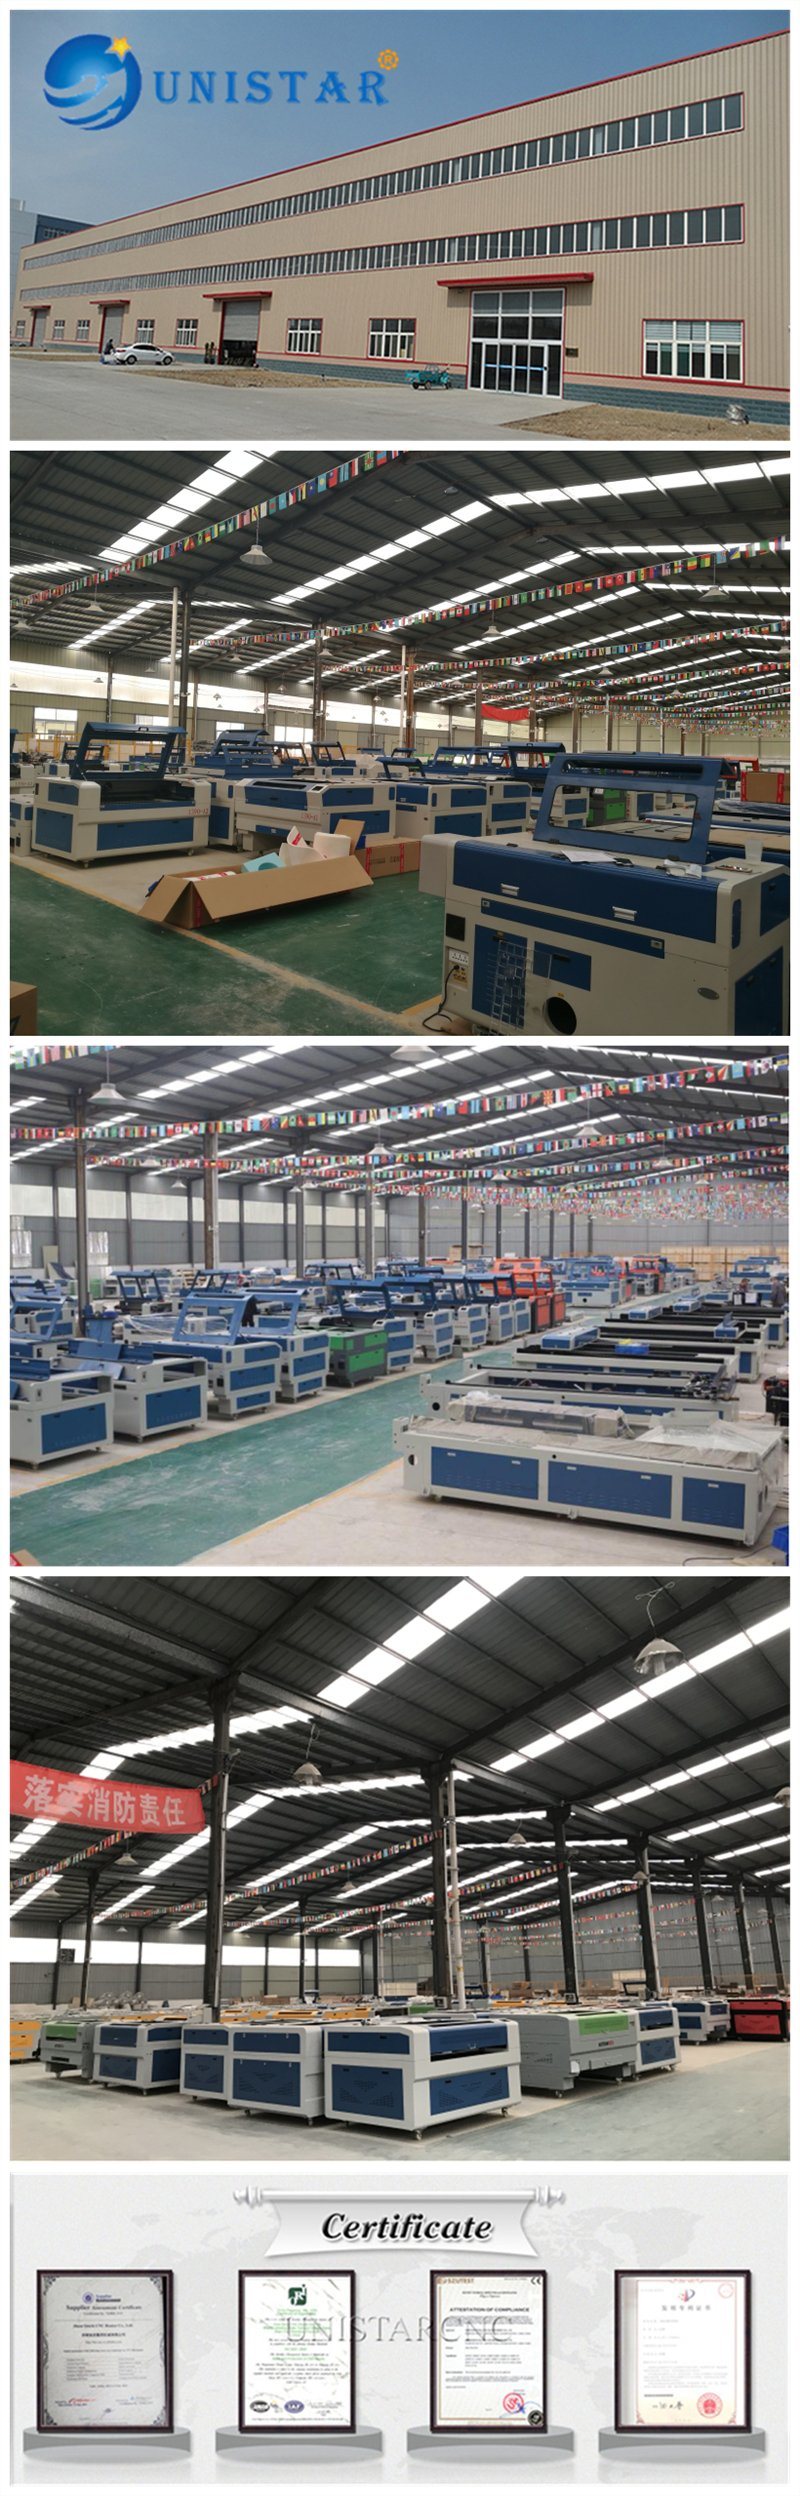 2020 New Type Usj1390 CO2 Laser Cutting Machine /Laser Cutter for Wood, MDF, Paper, Leather, Acrylic, Plywood